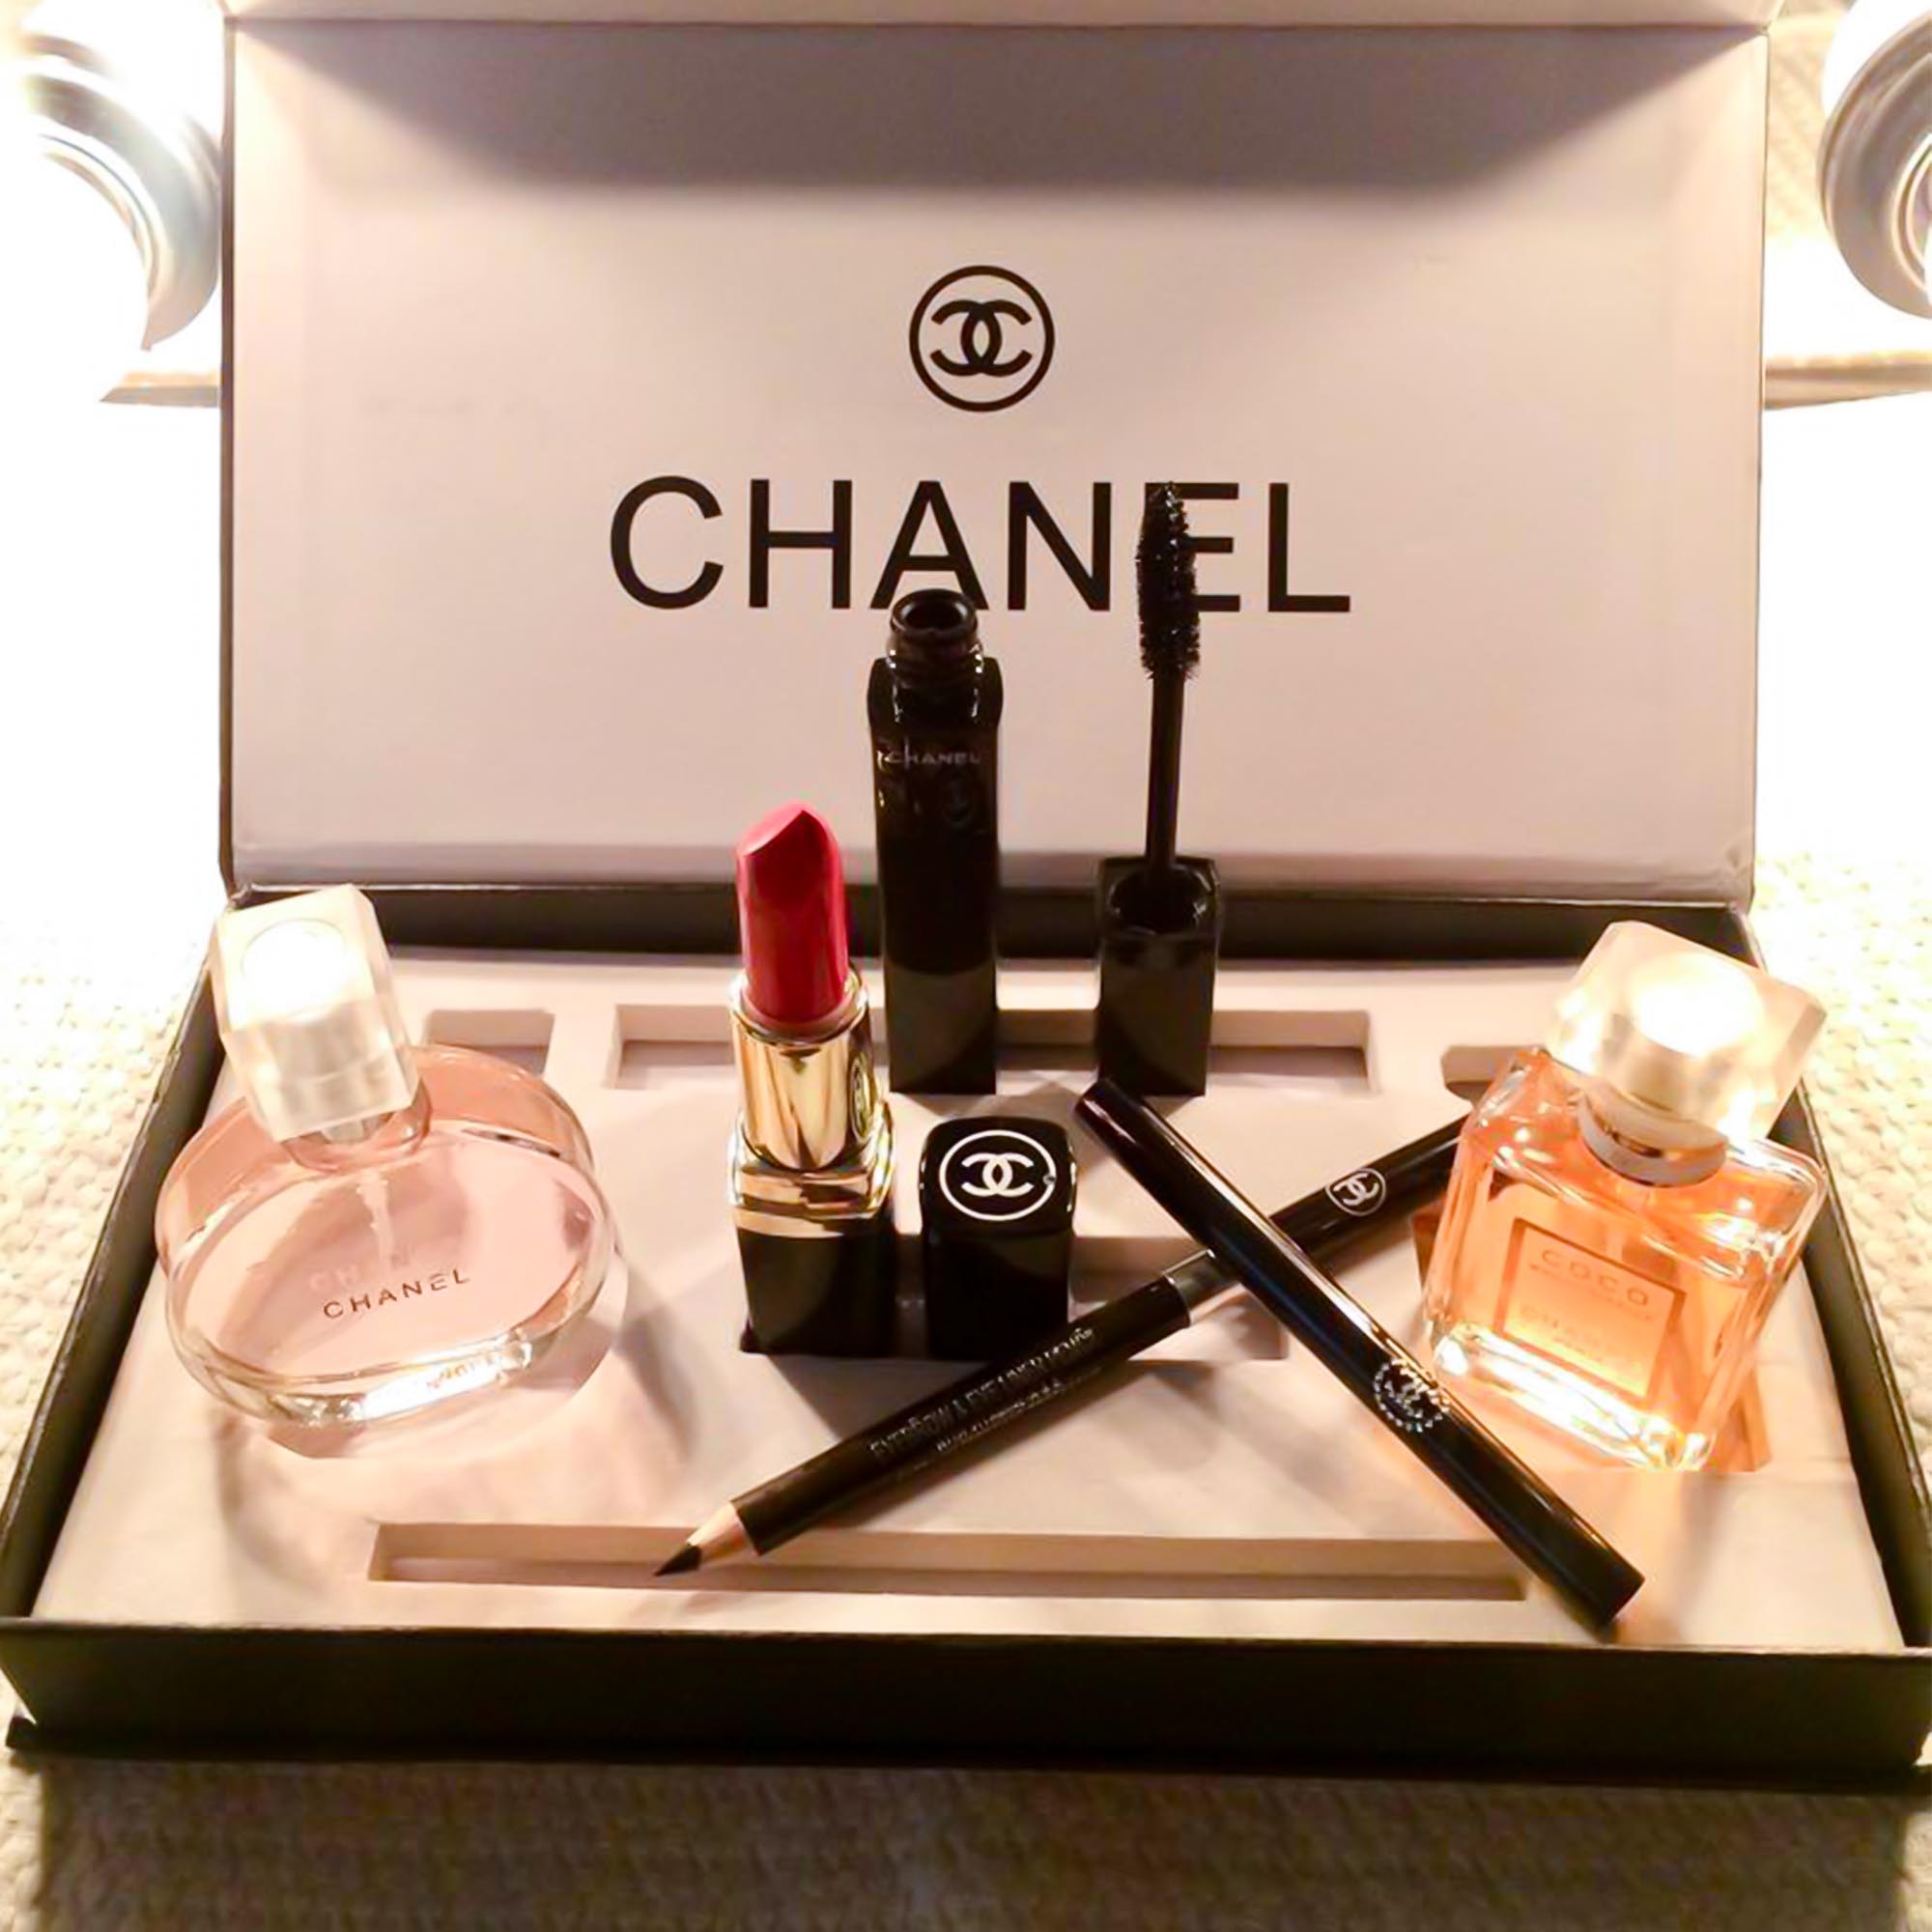 CHANEL Makeup for sale in Knoxville Tennessee  Facebook Marketplace   Facebook